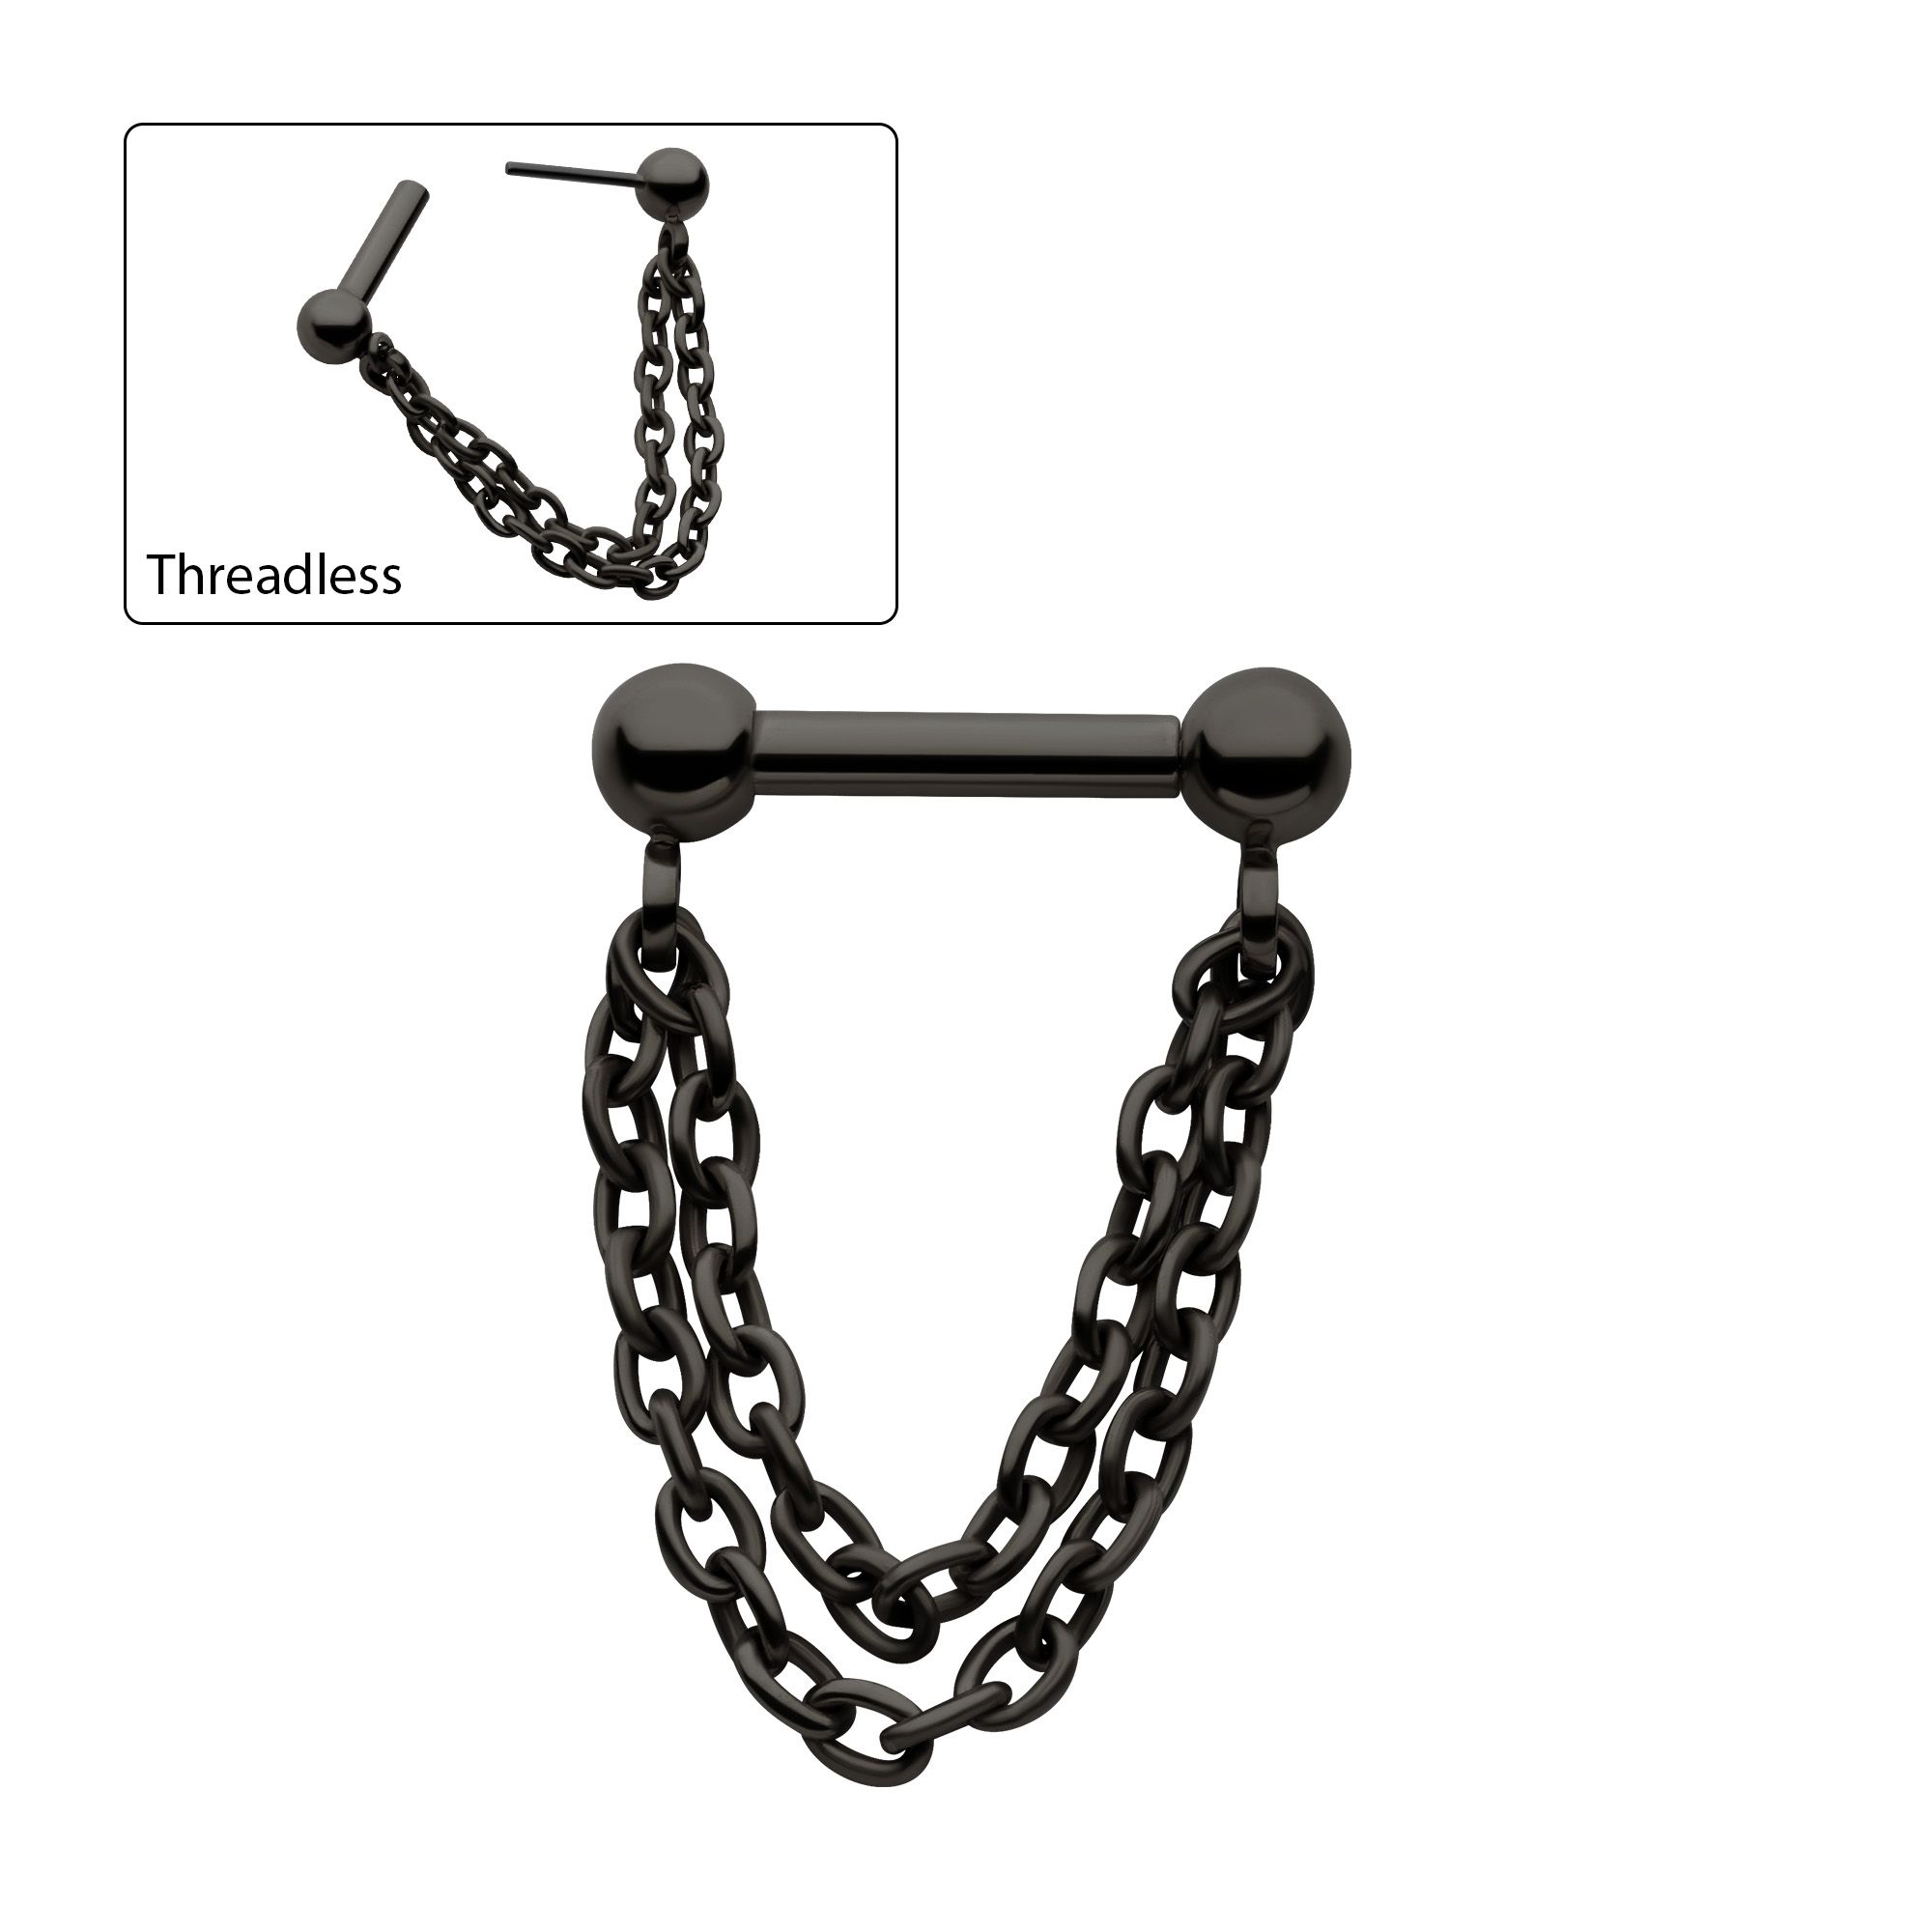 Cartilage Earring - Cartilage Chain Black PVD Titanium 2 Tier Chains a One Side Threadless, One Side Fixed Bar Ball ends - 1 Piece -Rebel Bod-RebelBod